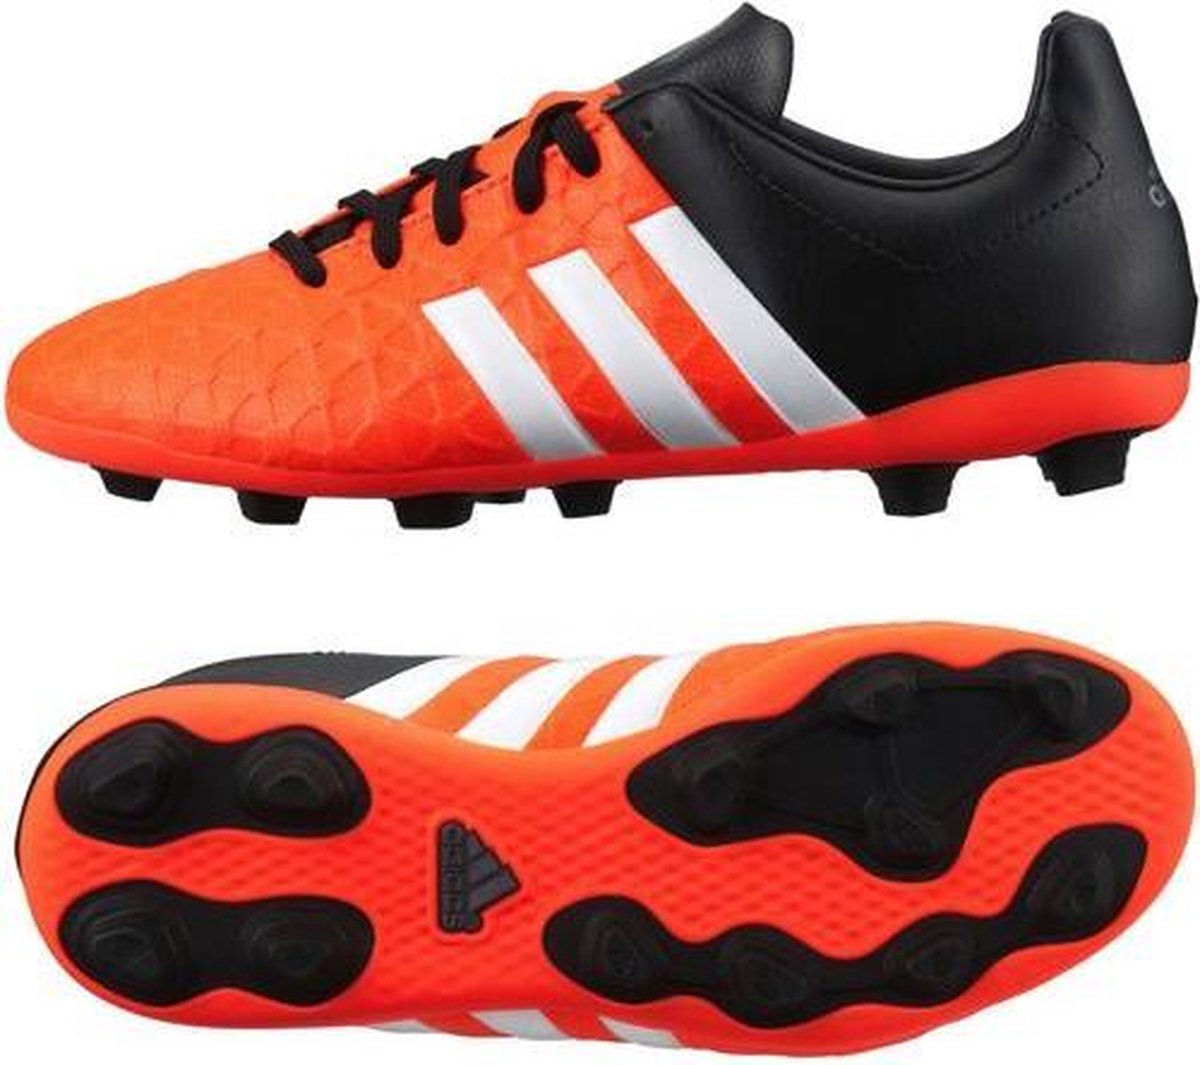 Adidas Ace 15.4 Fxg Clearance Outlet, 61% OFF | maikyaulaw.com